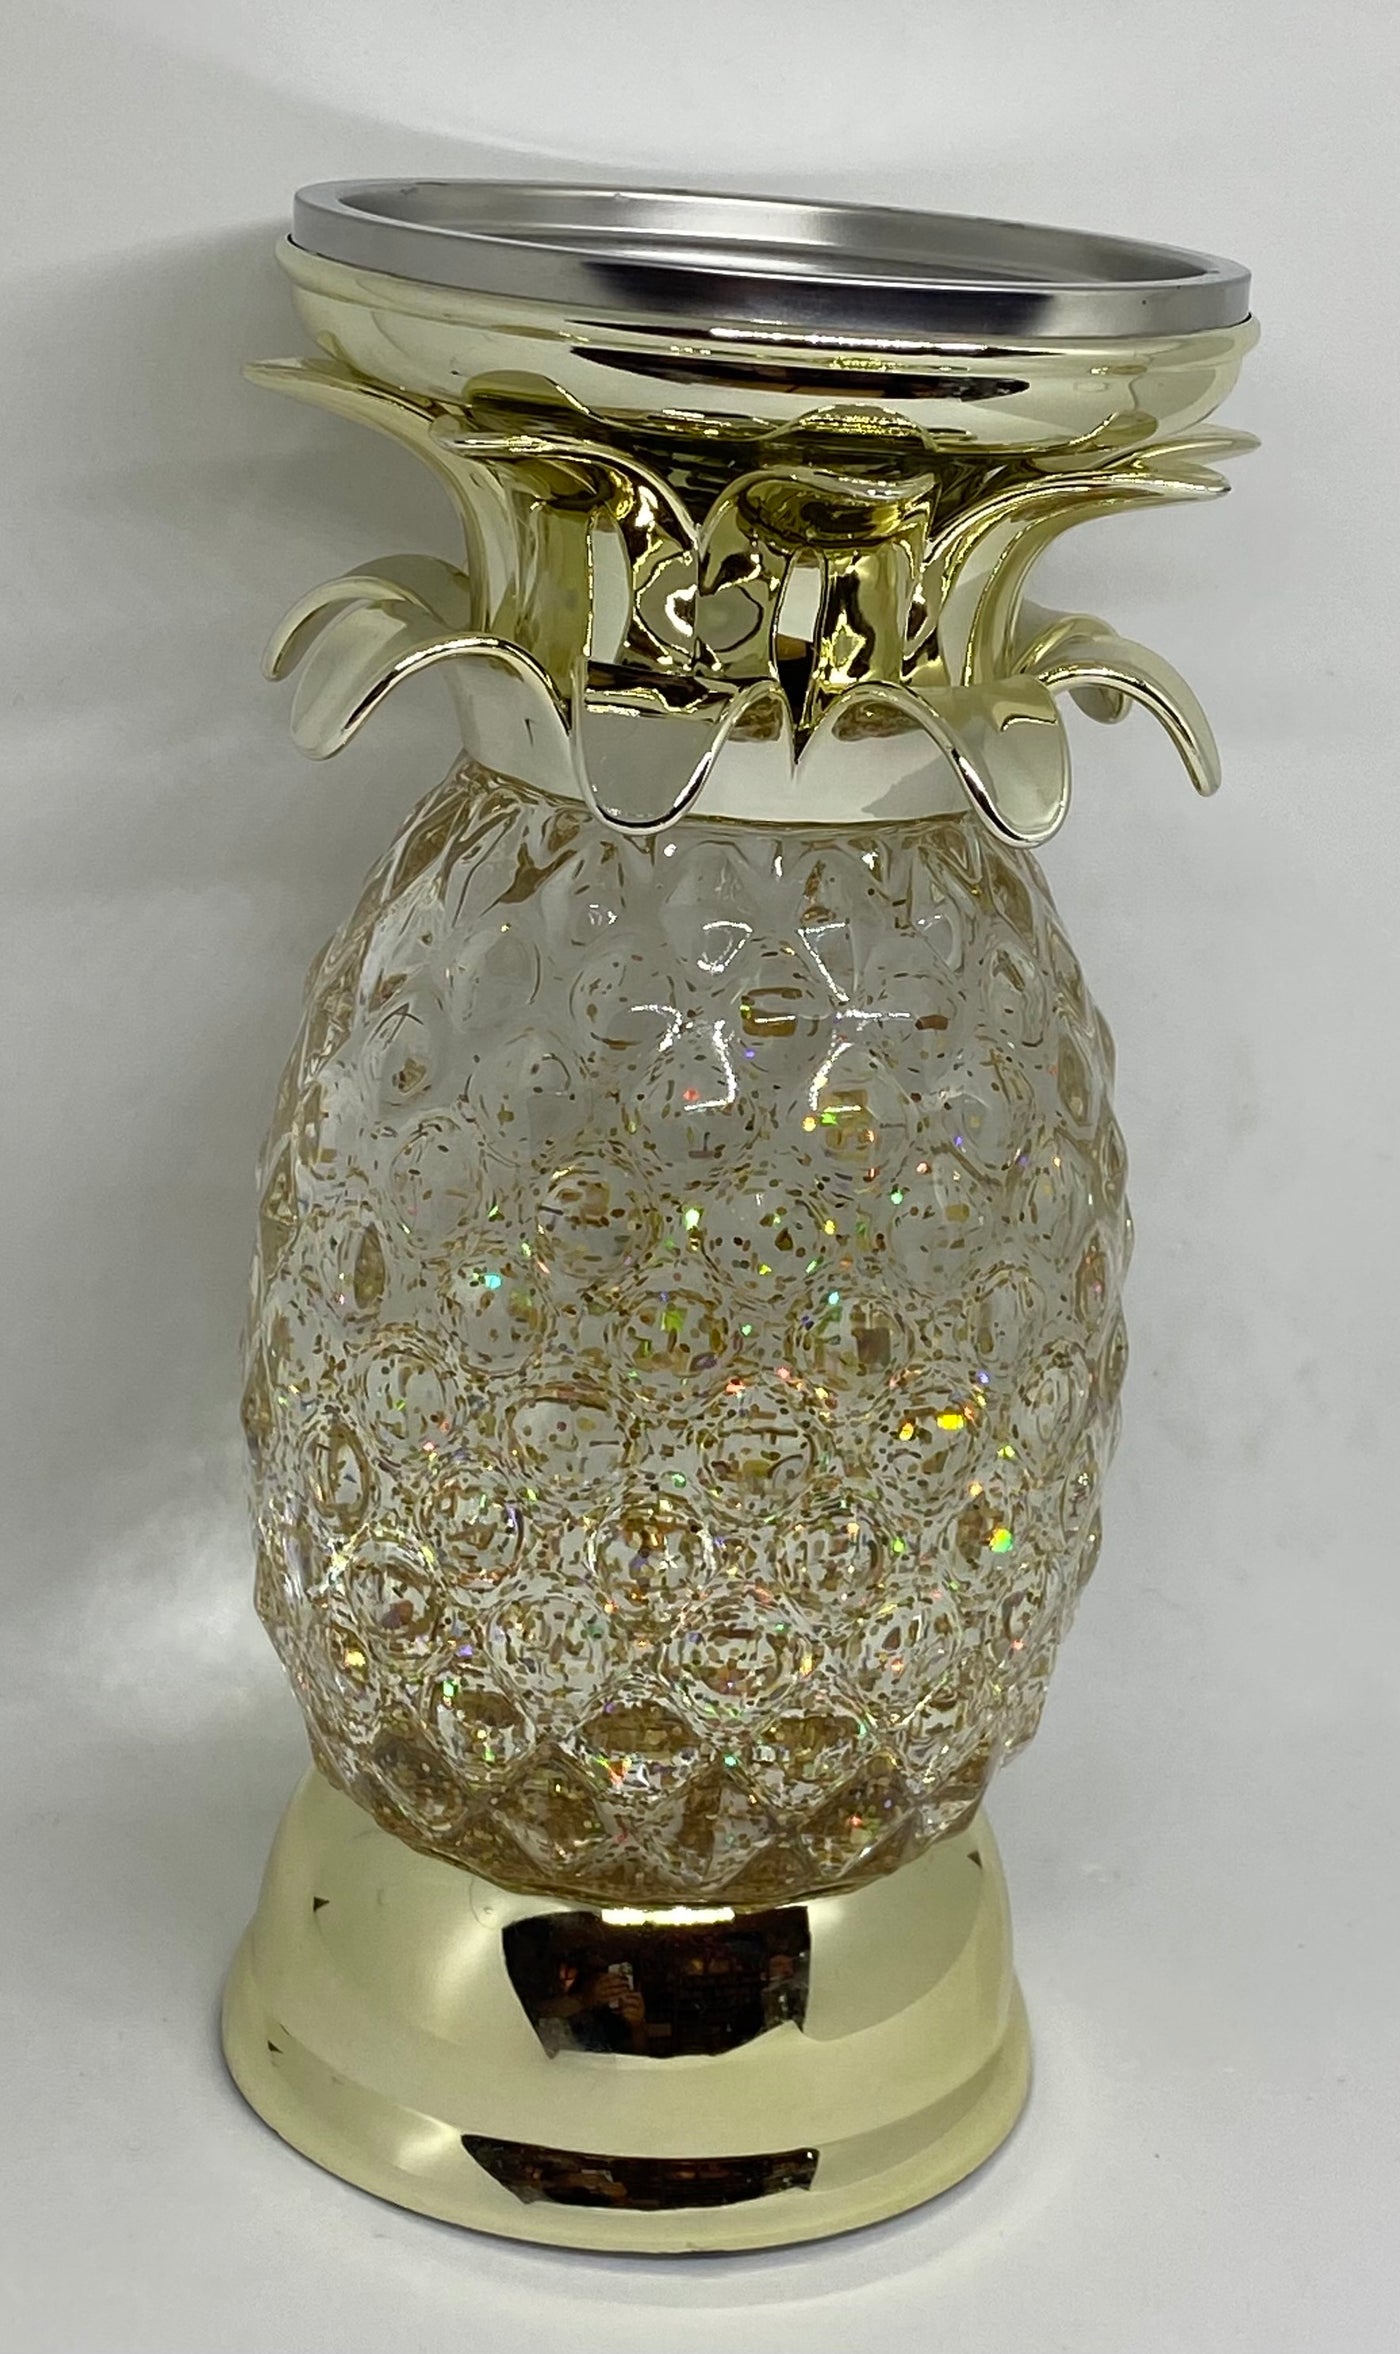 Bath and Body Works Pineapple Pedestal Light Up 3 Wick Candle Holder New